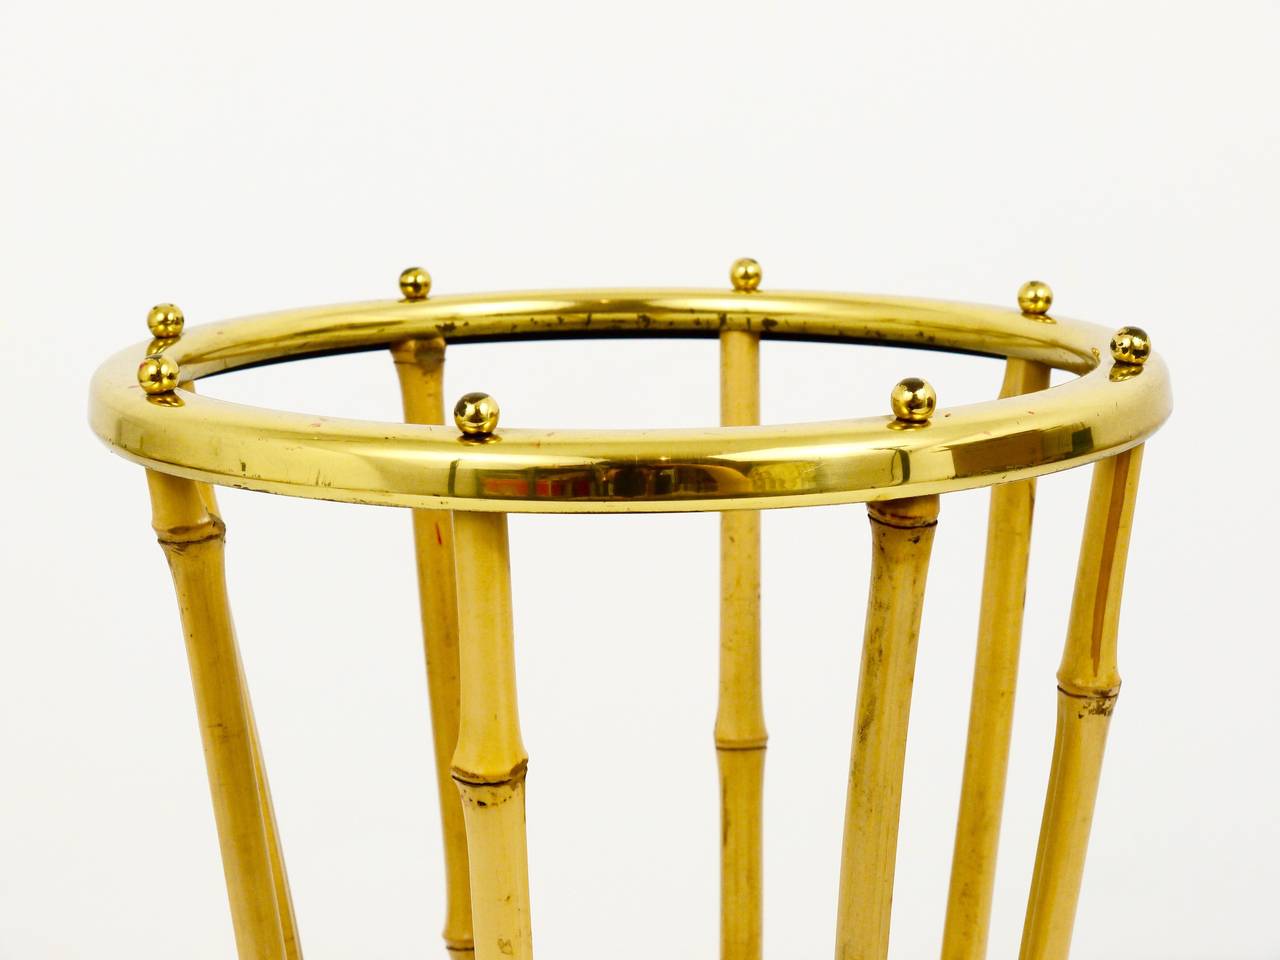 A beautiful Mid-Century bamboo and brass umbrella stand. Made in Austria in the 1950s. In good condition with nice patina on the brass. In the style of Carl Auböck.